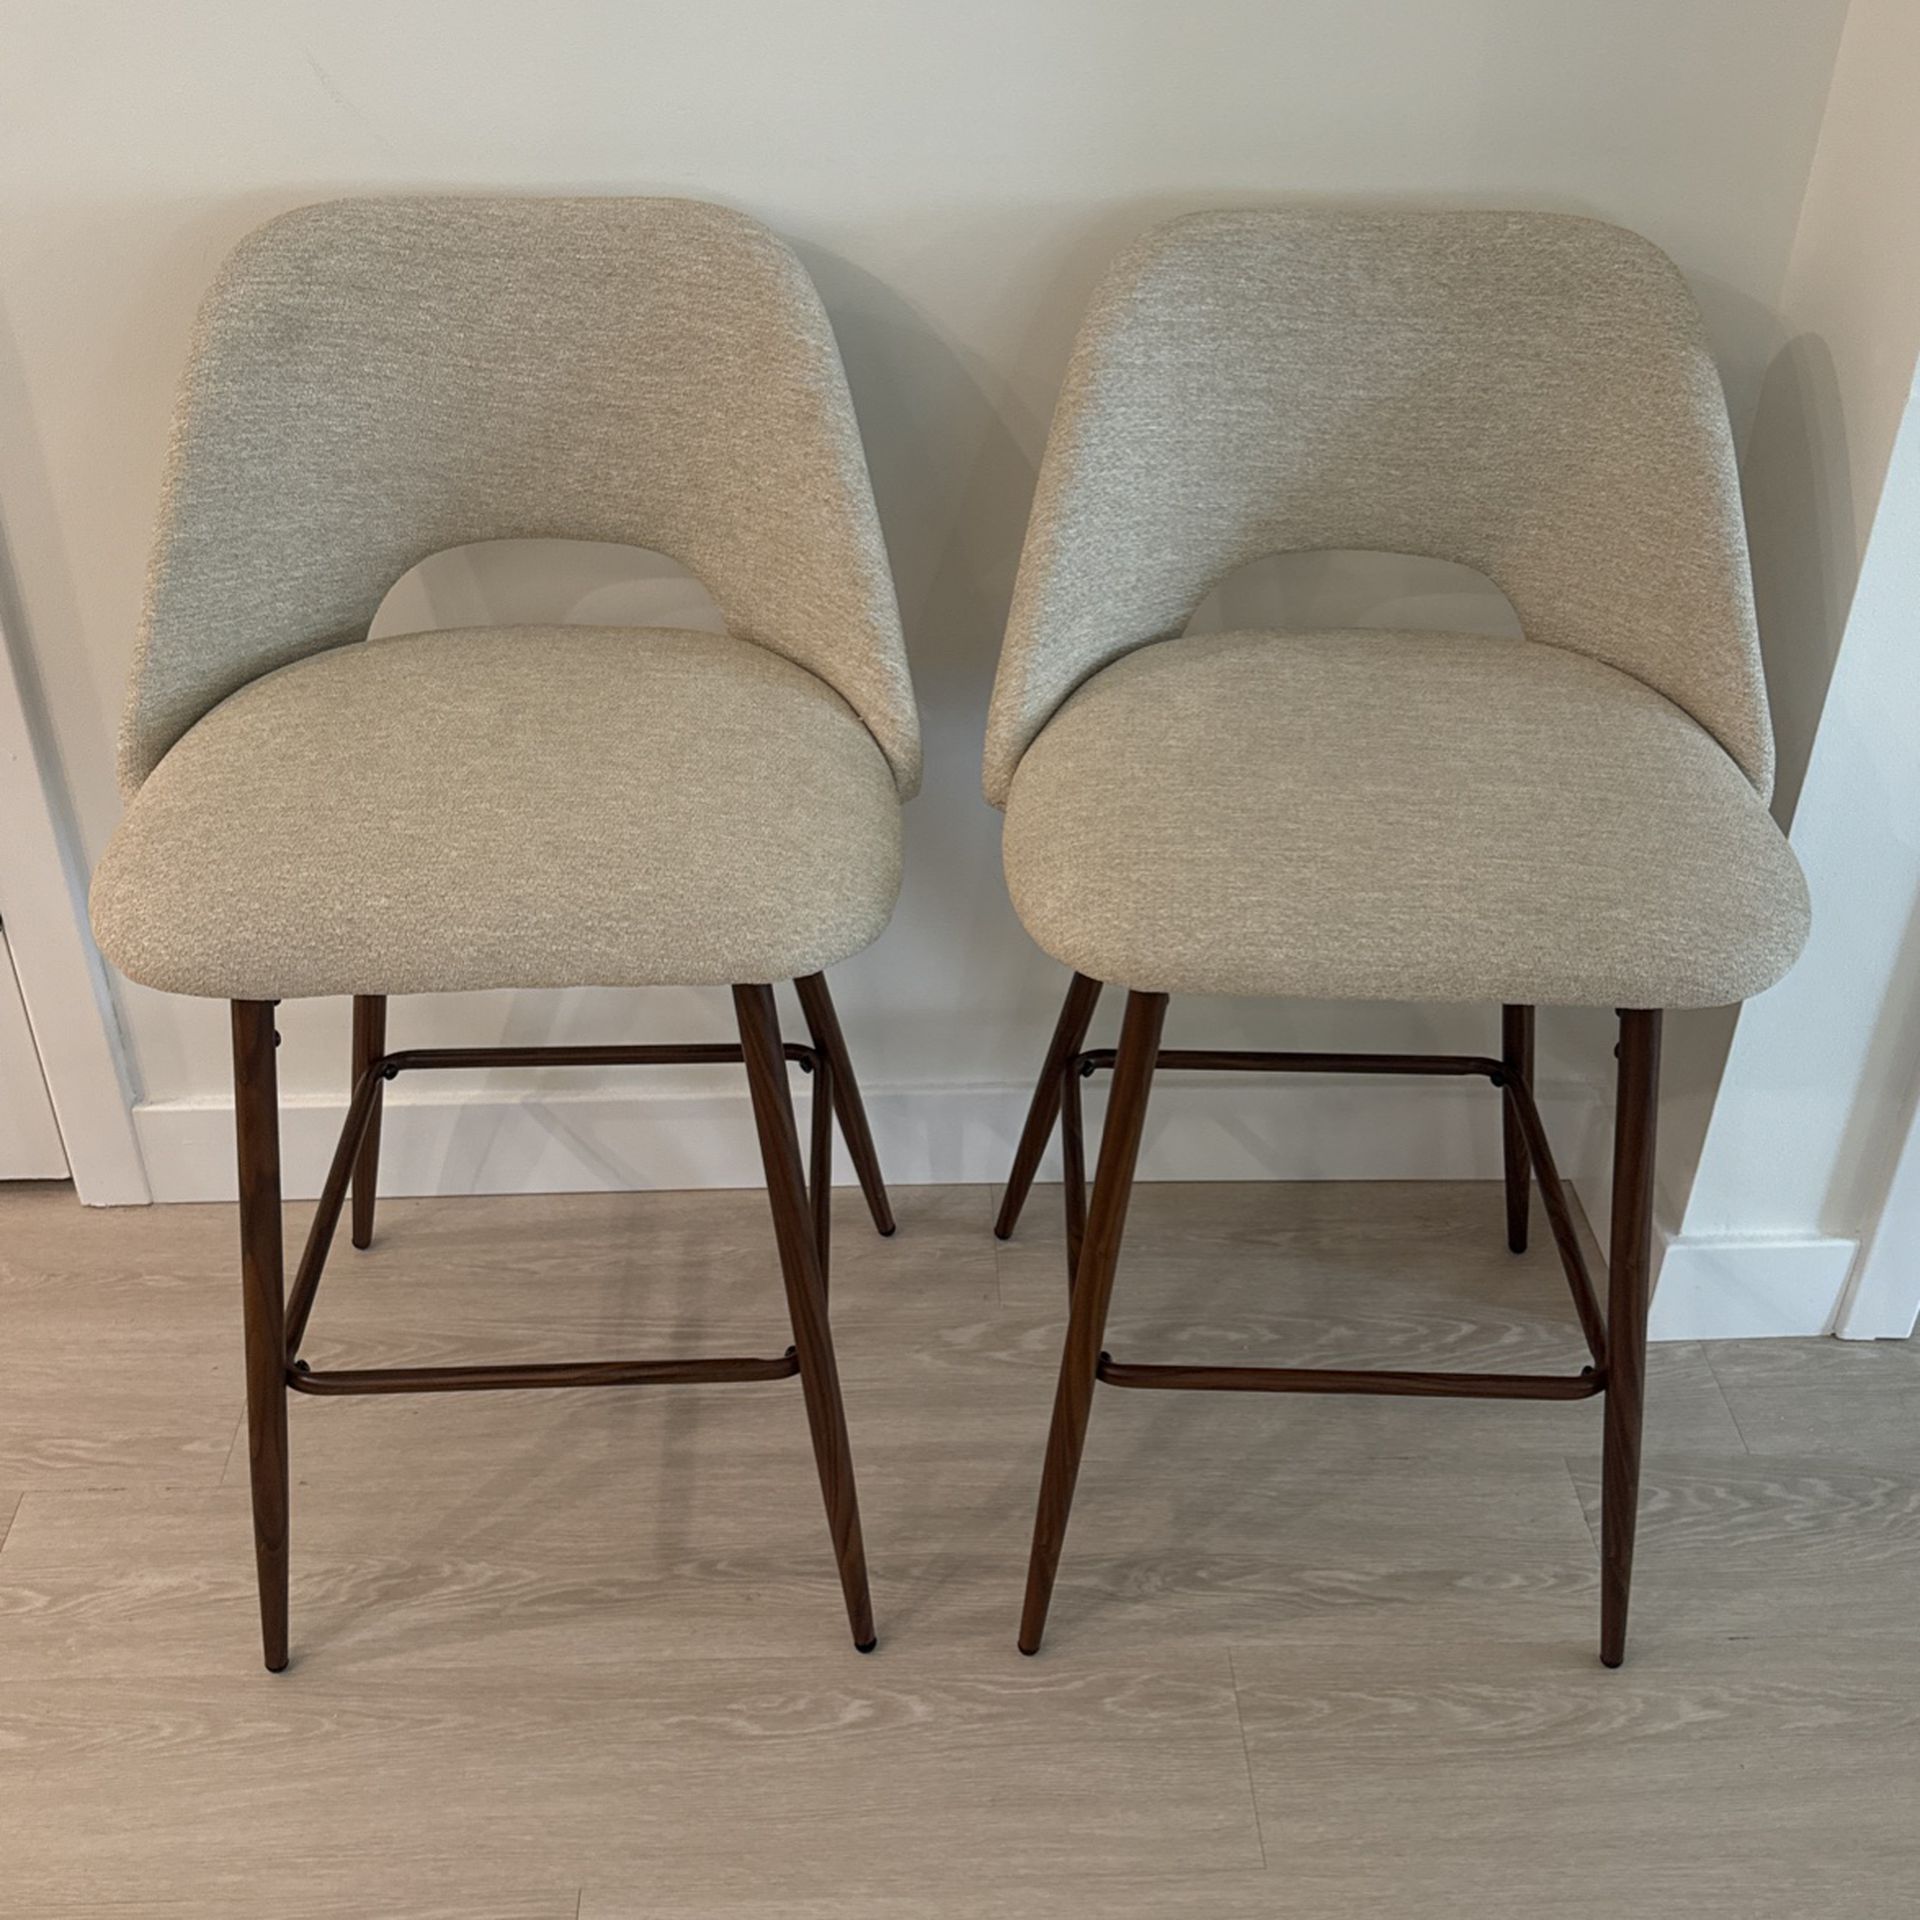 Counter Stools - Set Of 2 